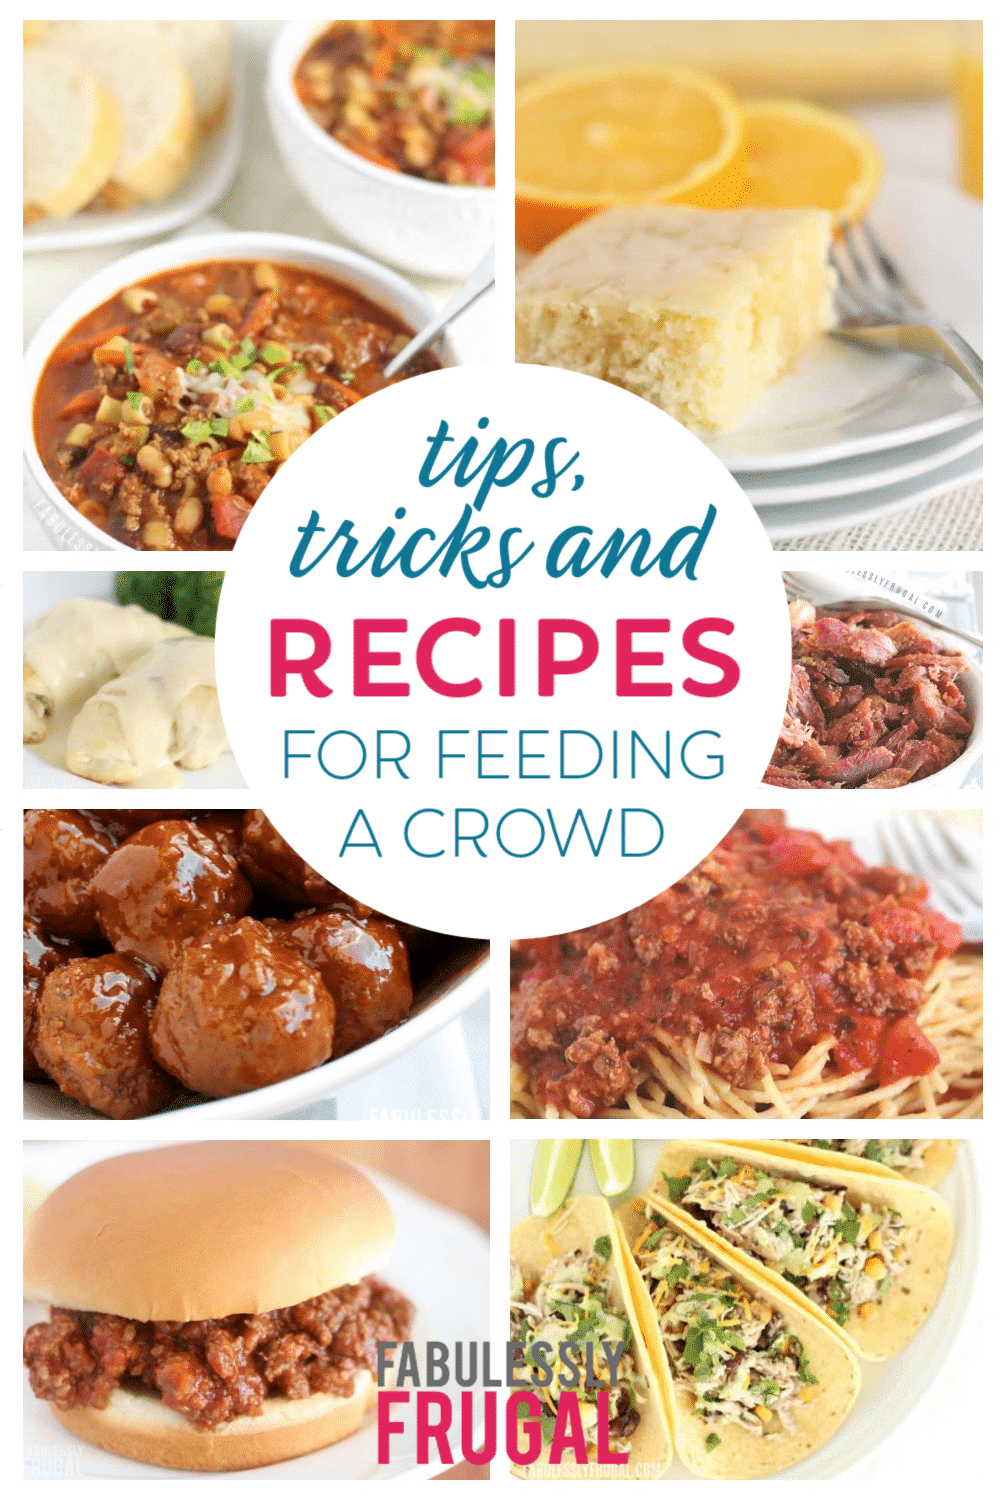 Tips tricks and recipes for feeding a crowd